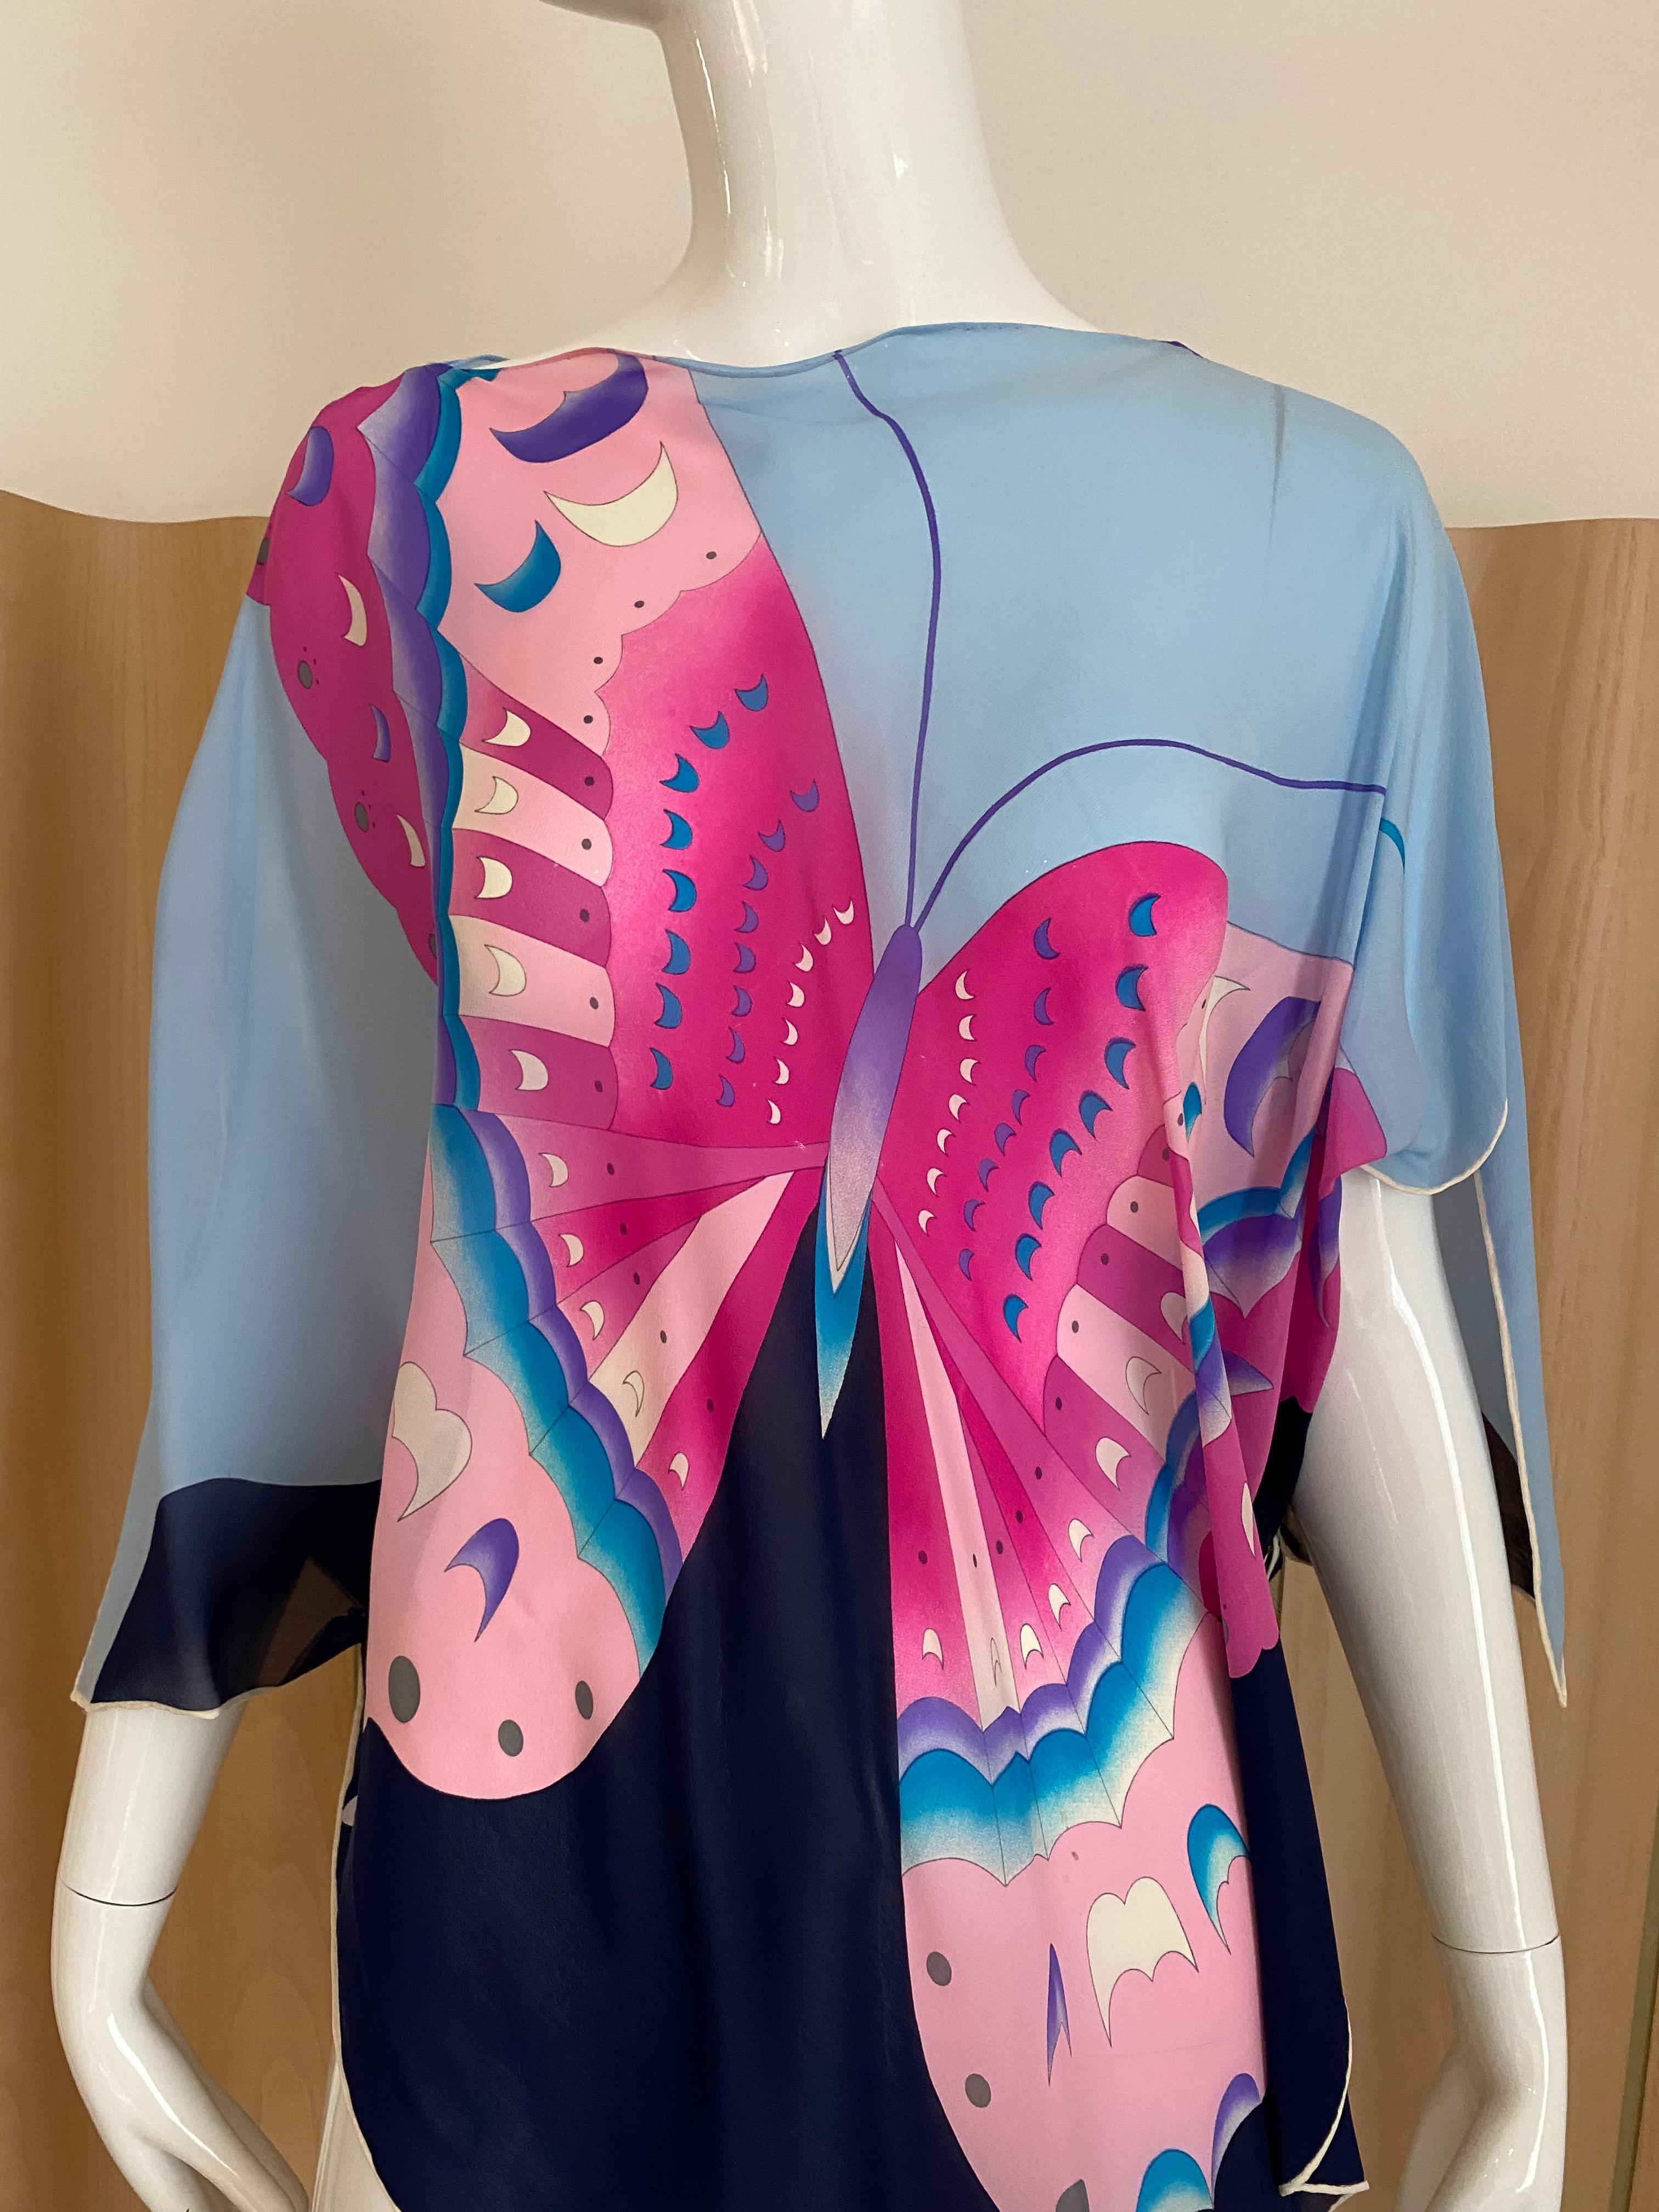 1970s Hanae Mori Butterfly print silk blouse.
color: blue, pink , white and purple
Size: Small - Medium
Fit size 0/2/4/6/8